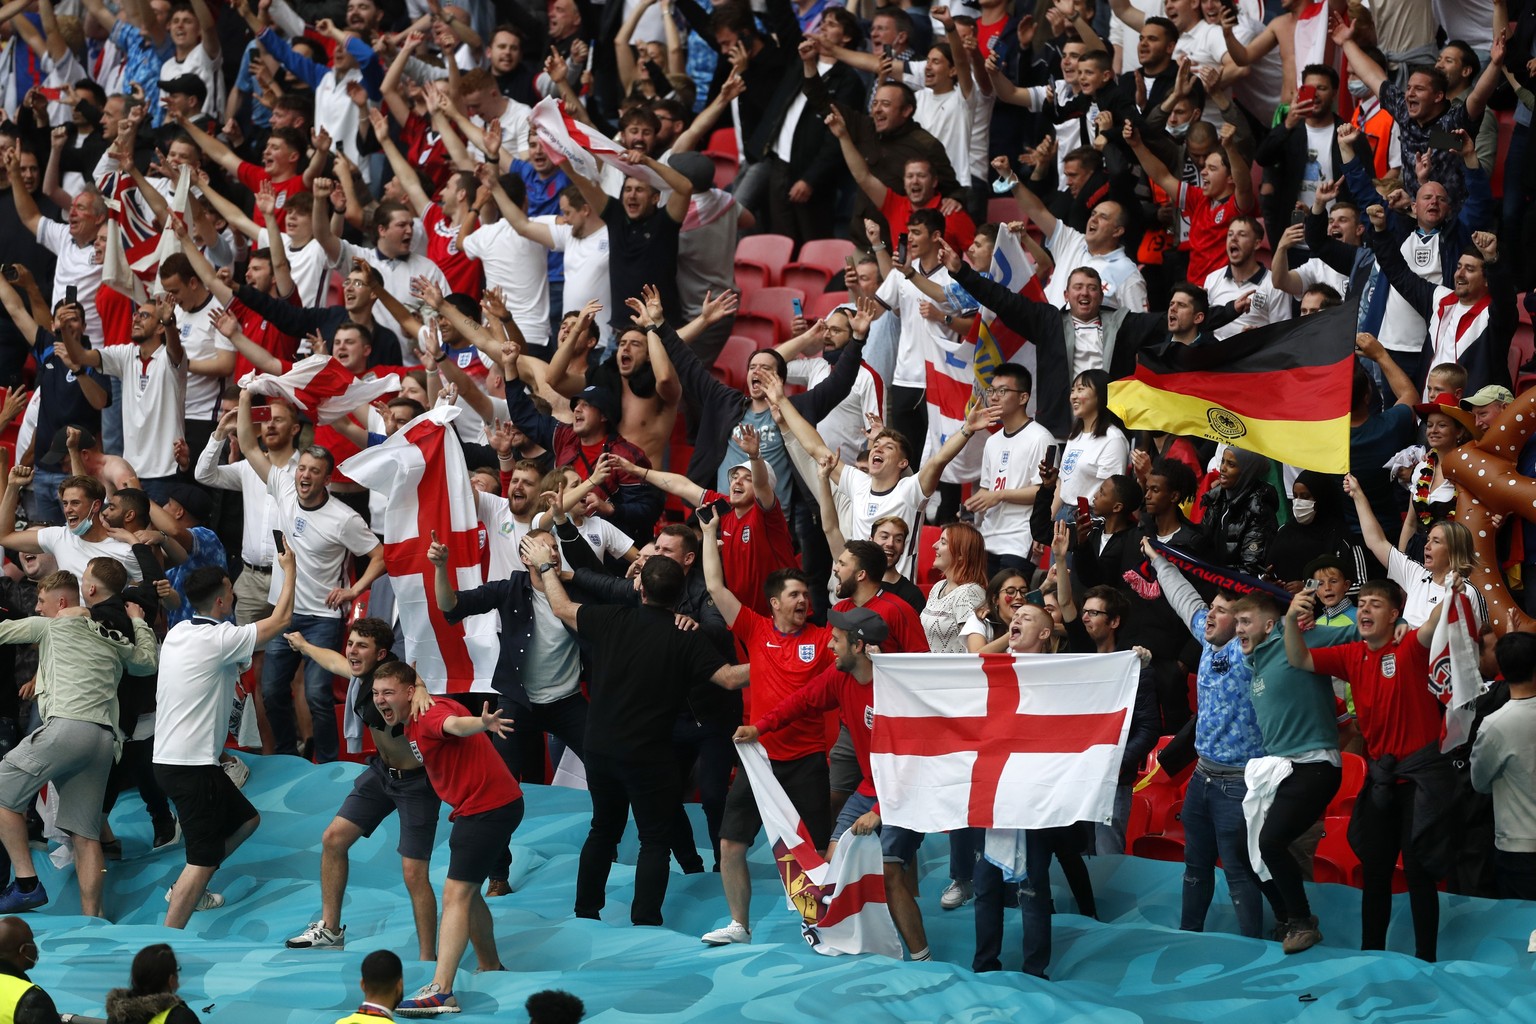 England fans cheer for their national team after the Euro 2020 soccer championship round of 16 match between England and Germany, at Wembley stadium, in London, Tuesday, June 29, 2021. England won 2-0 ...